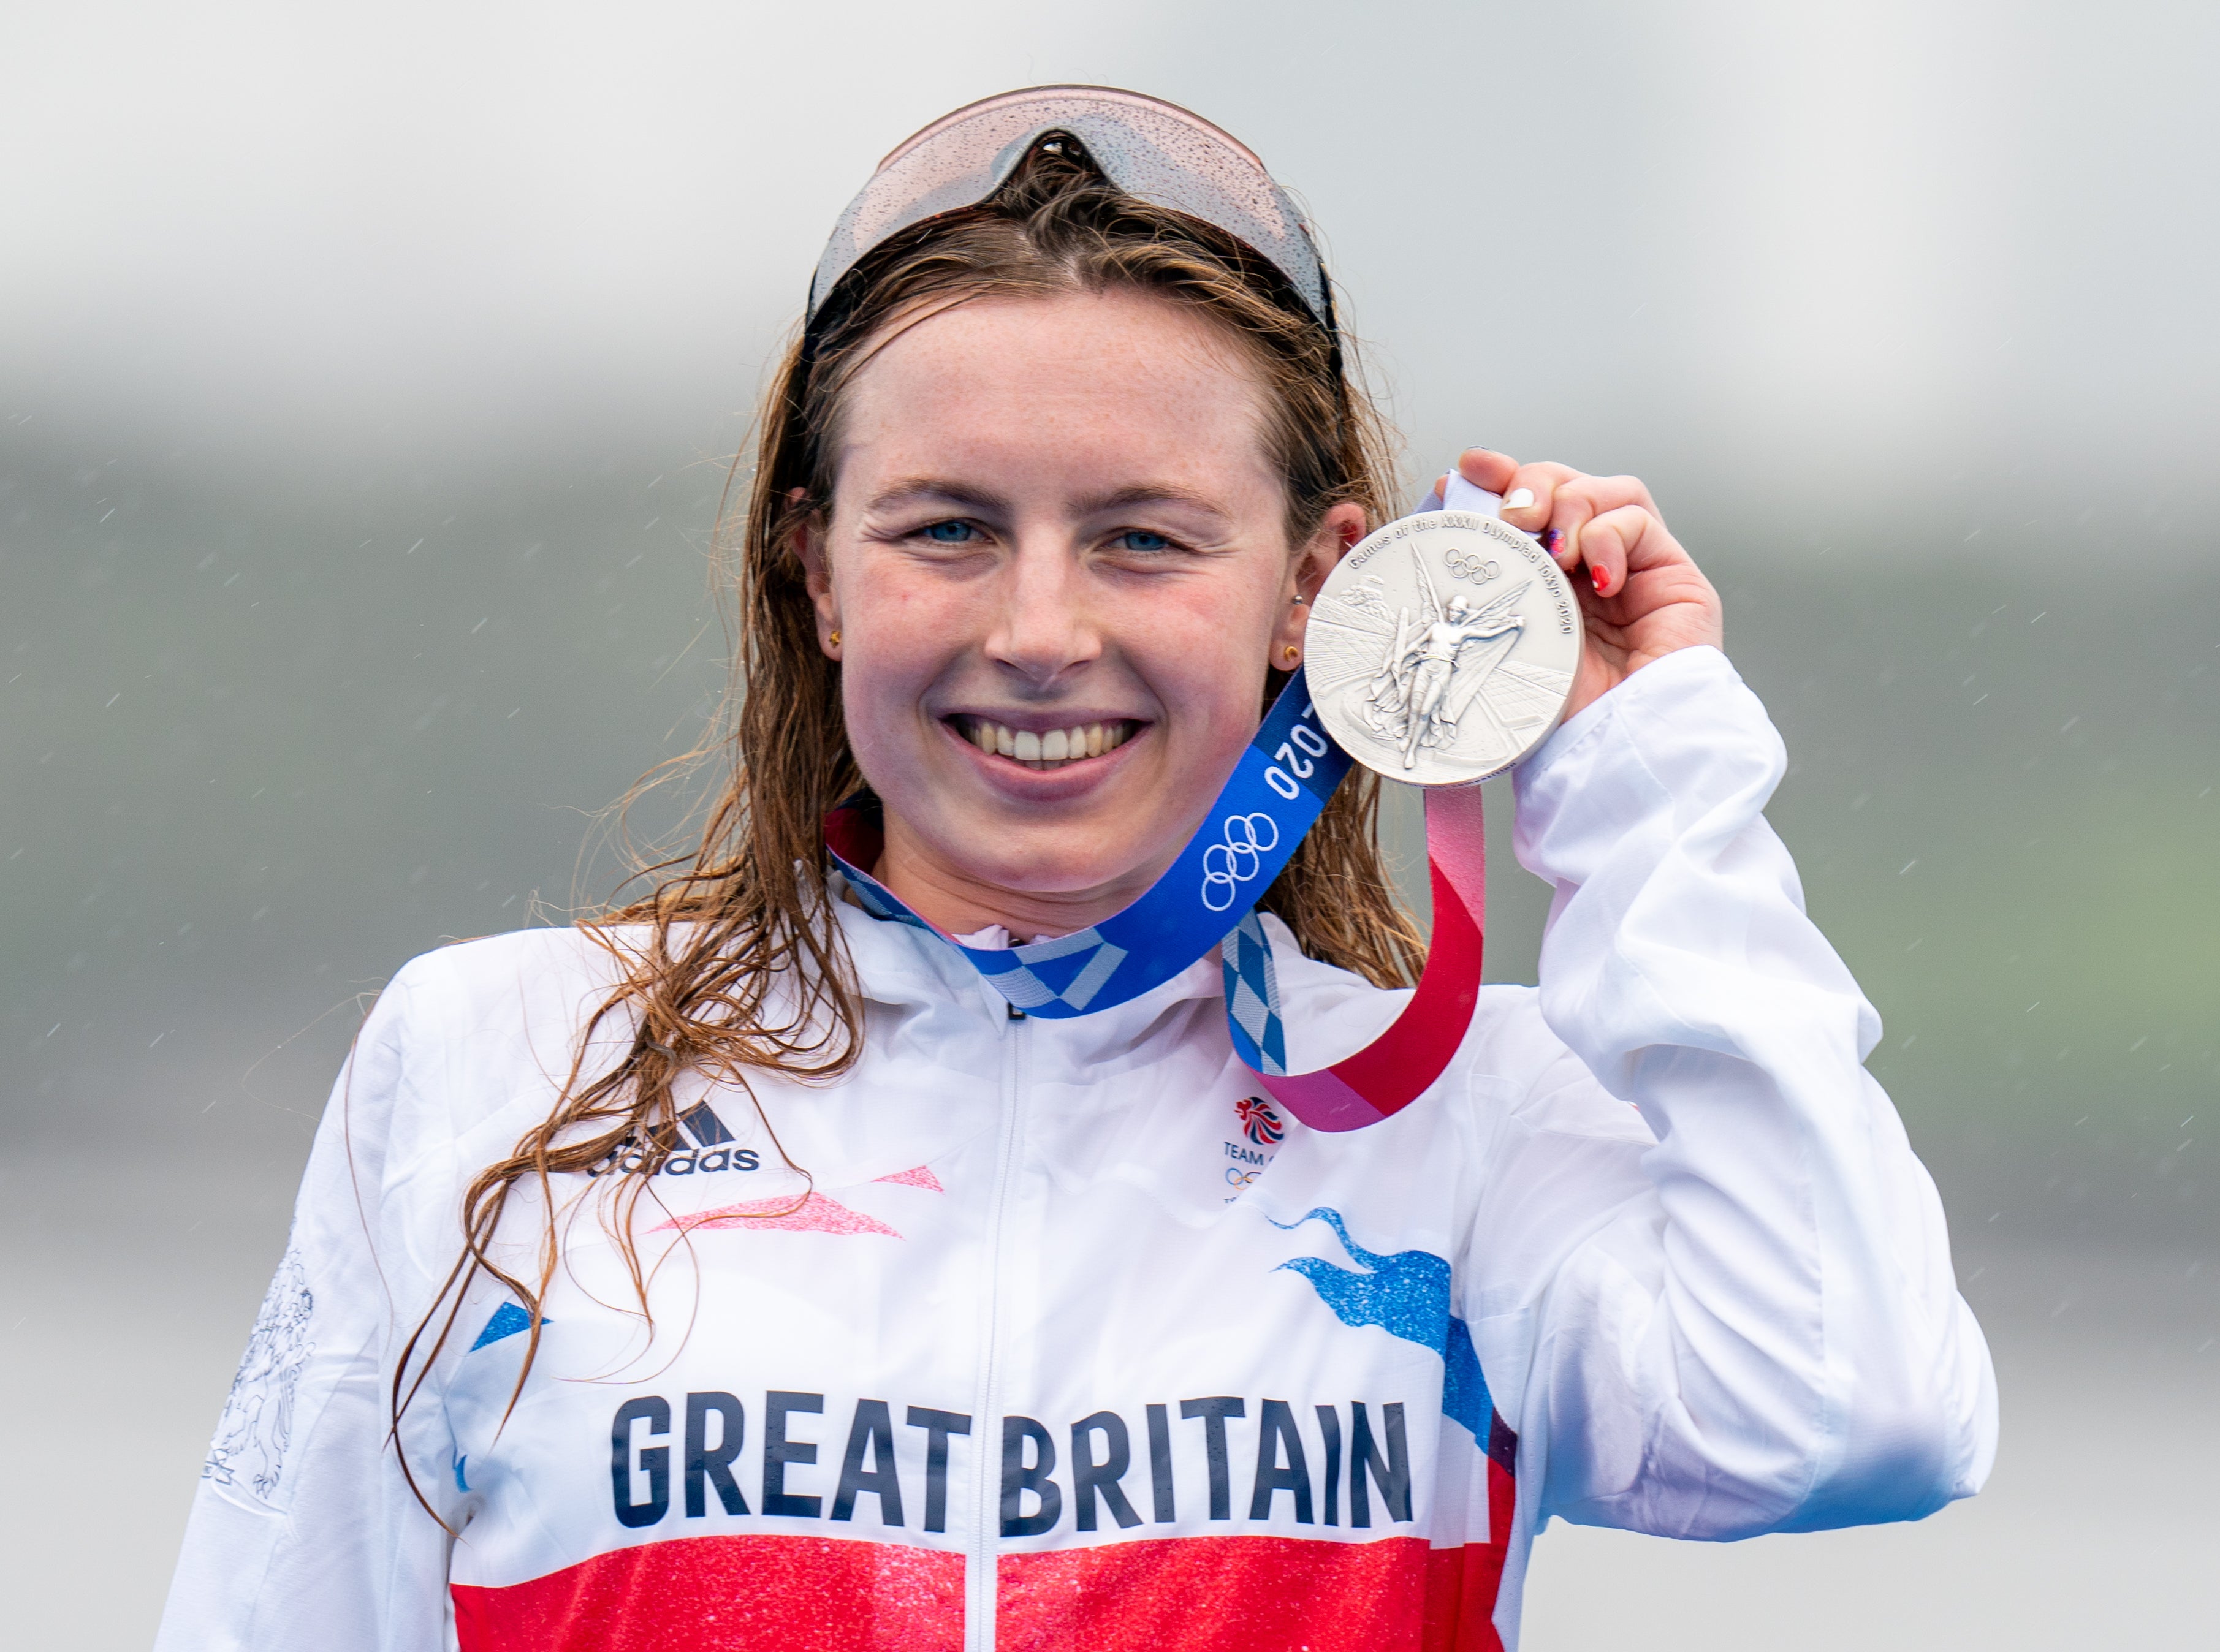 Georgia Taylor-Brown overcame a puncture to grab second place in the women’s triathlon